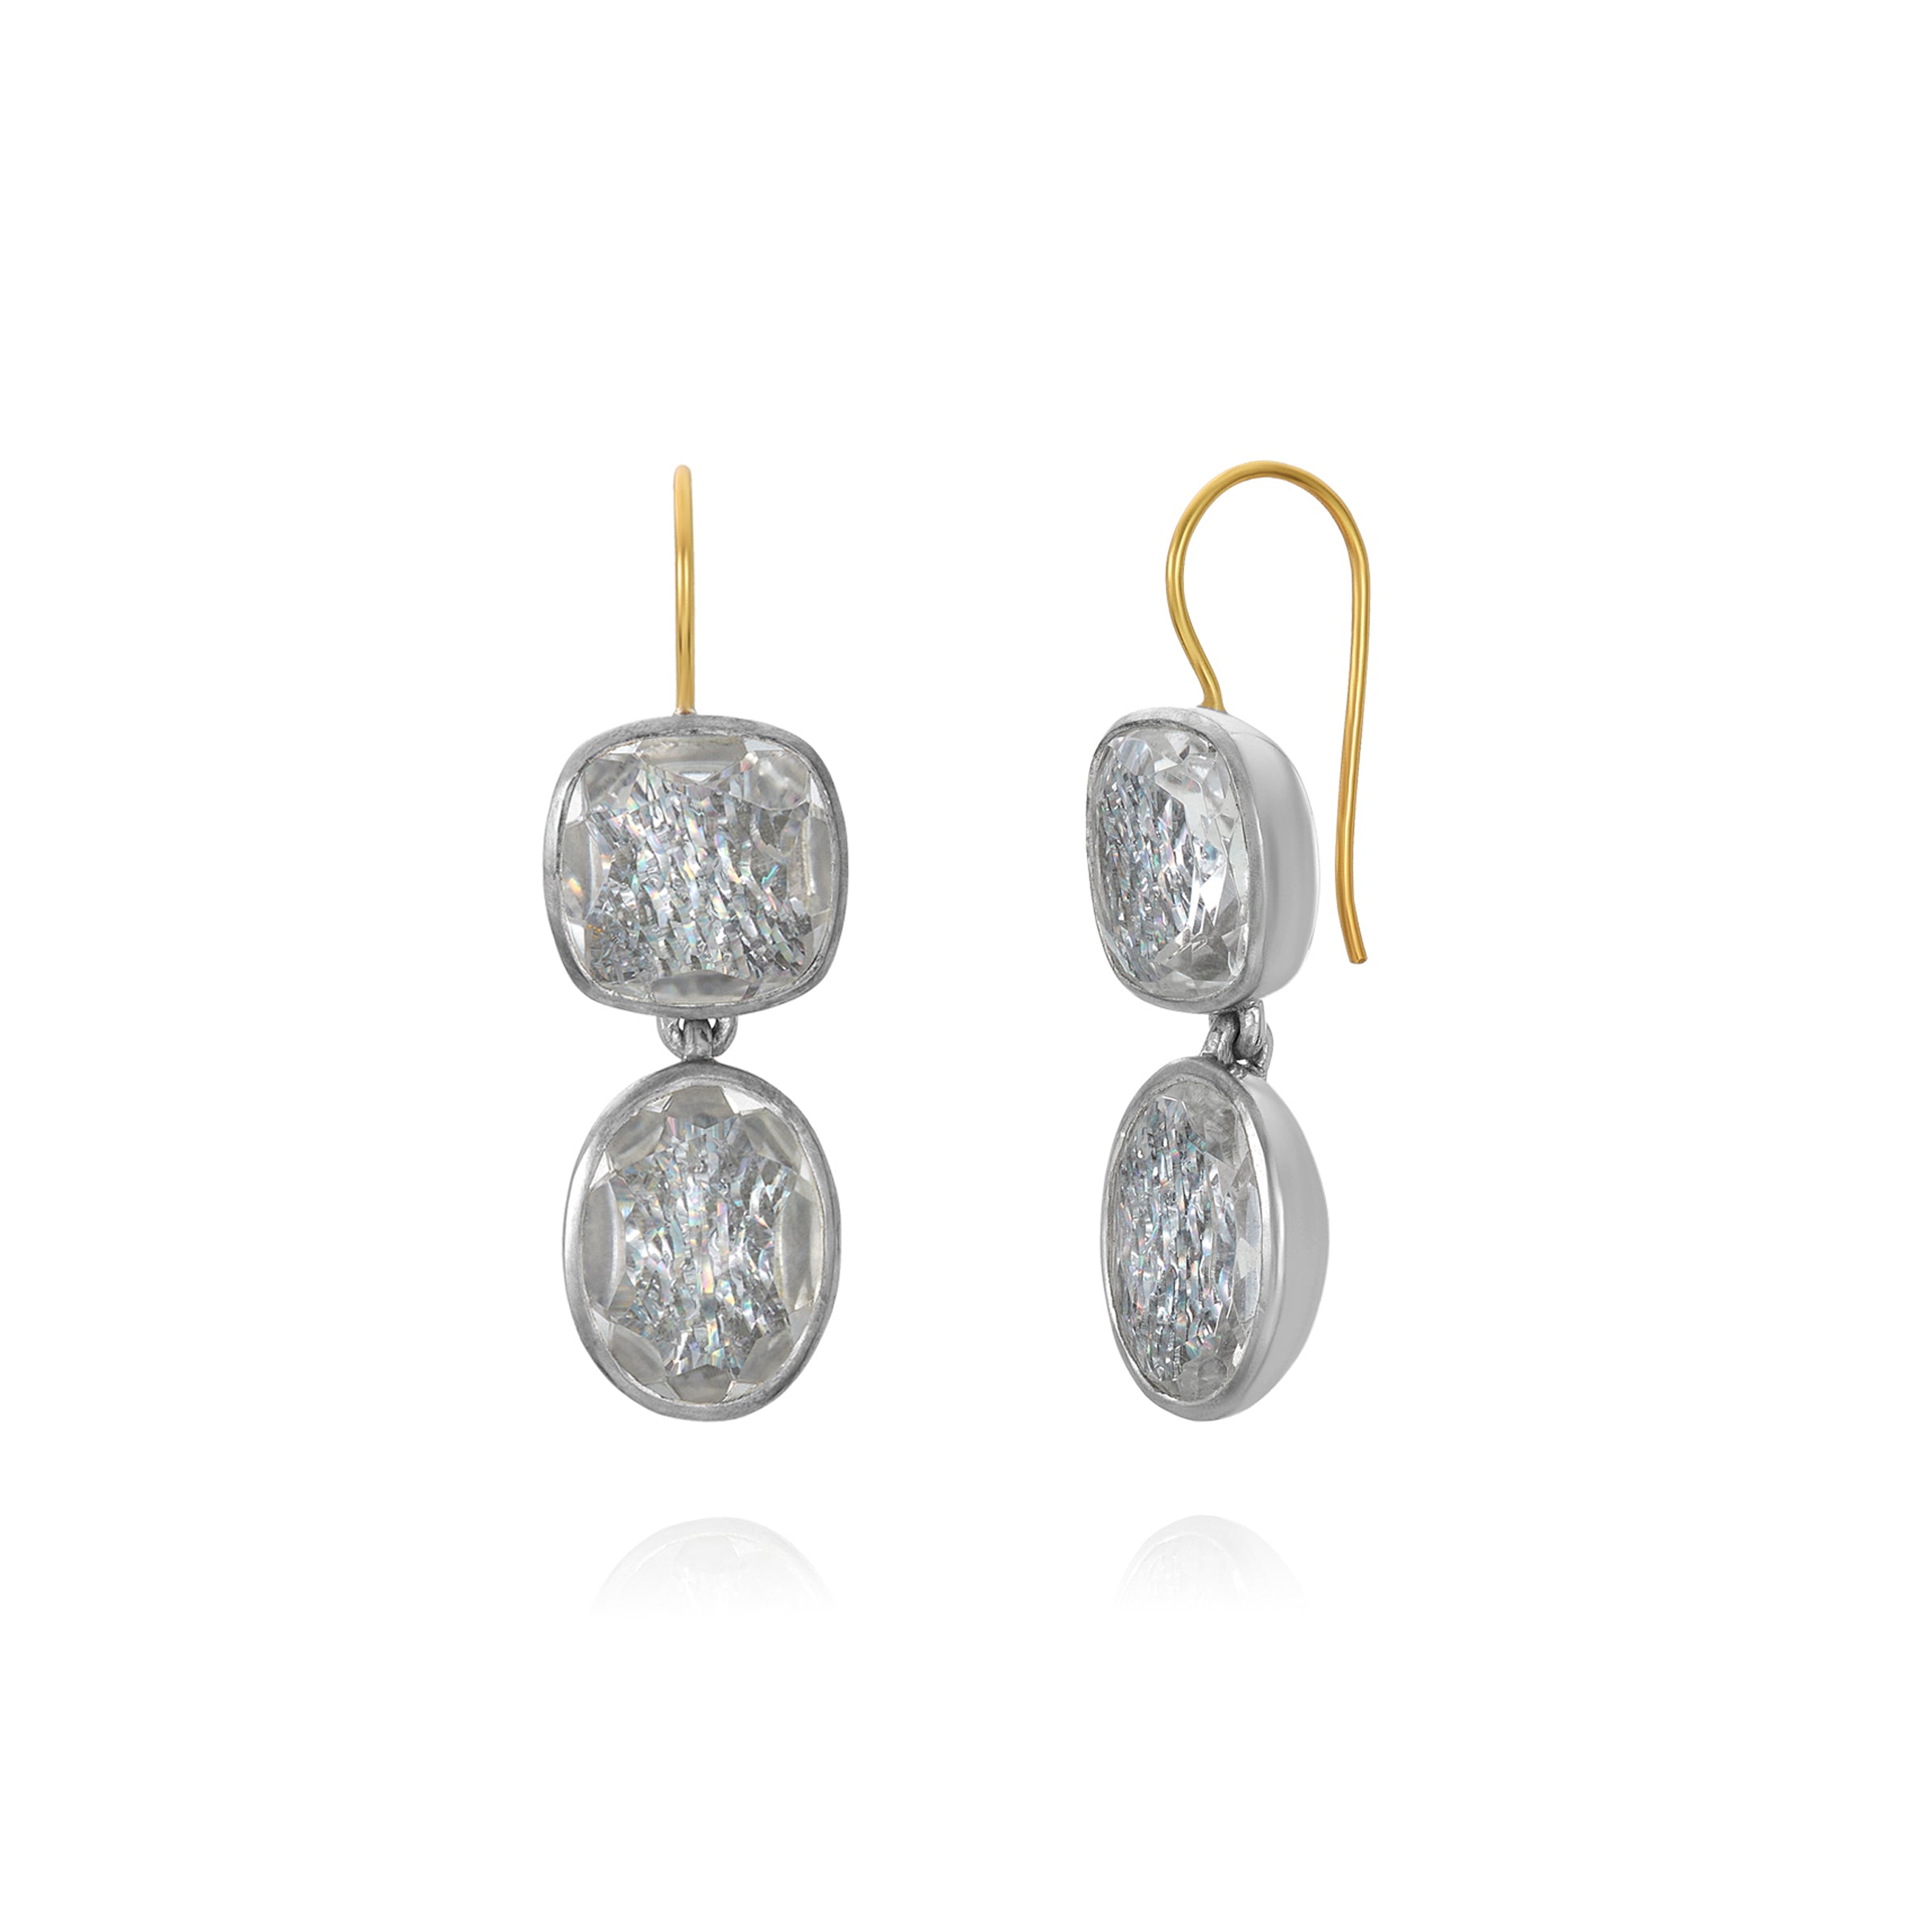 L&H Bride Cushion Oval Double Drop Earrings (White Rhodium Wash) - I Do / White Rhodium Washed Sterling Silver